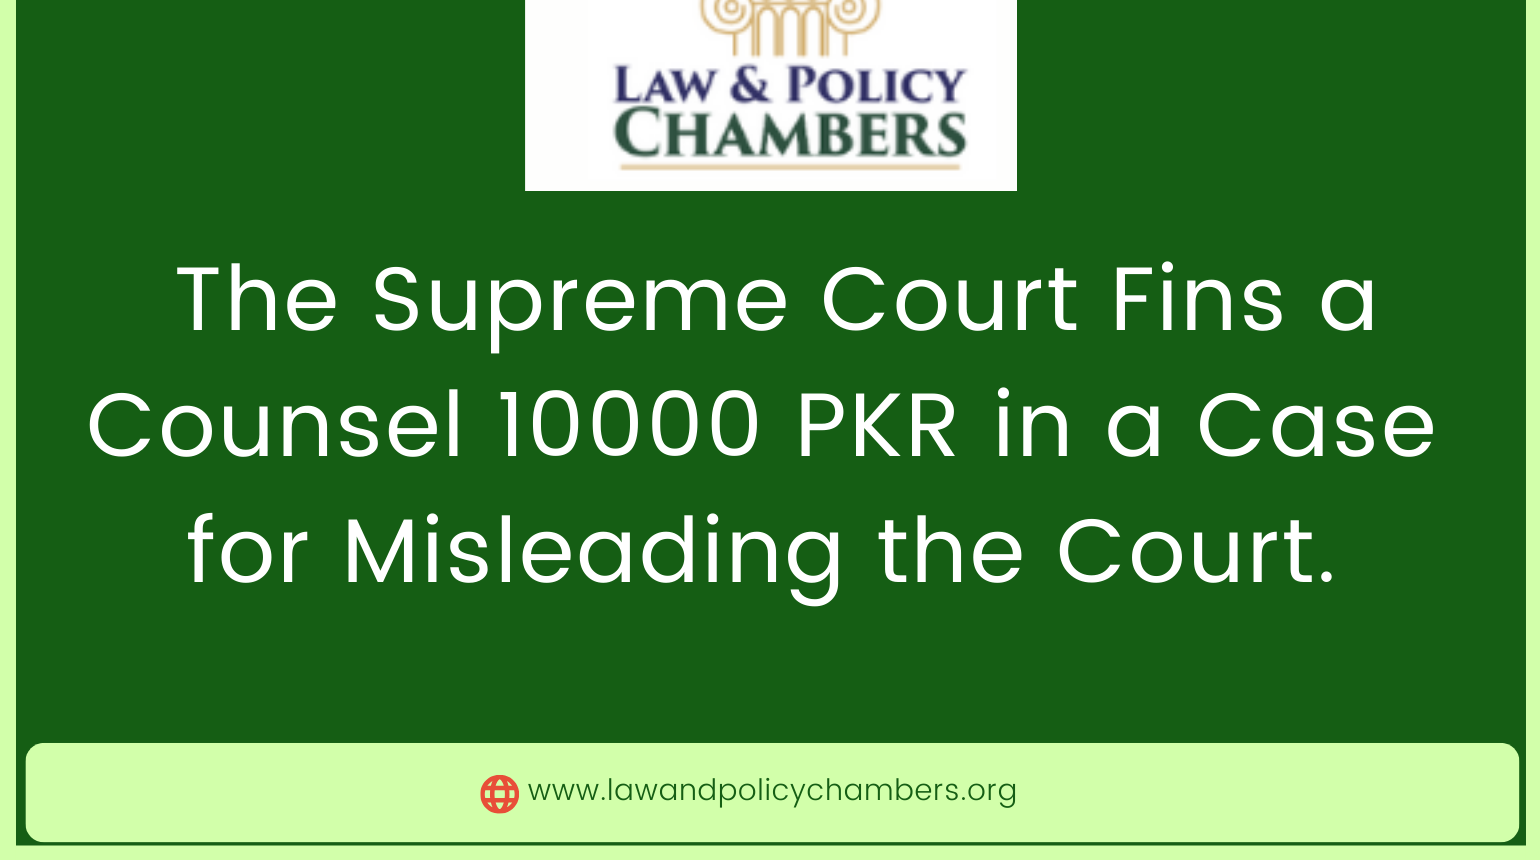 The Supreme Court Fins a Counsel 10000 PKR in a Case for Misleading the Court.